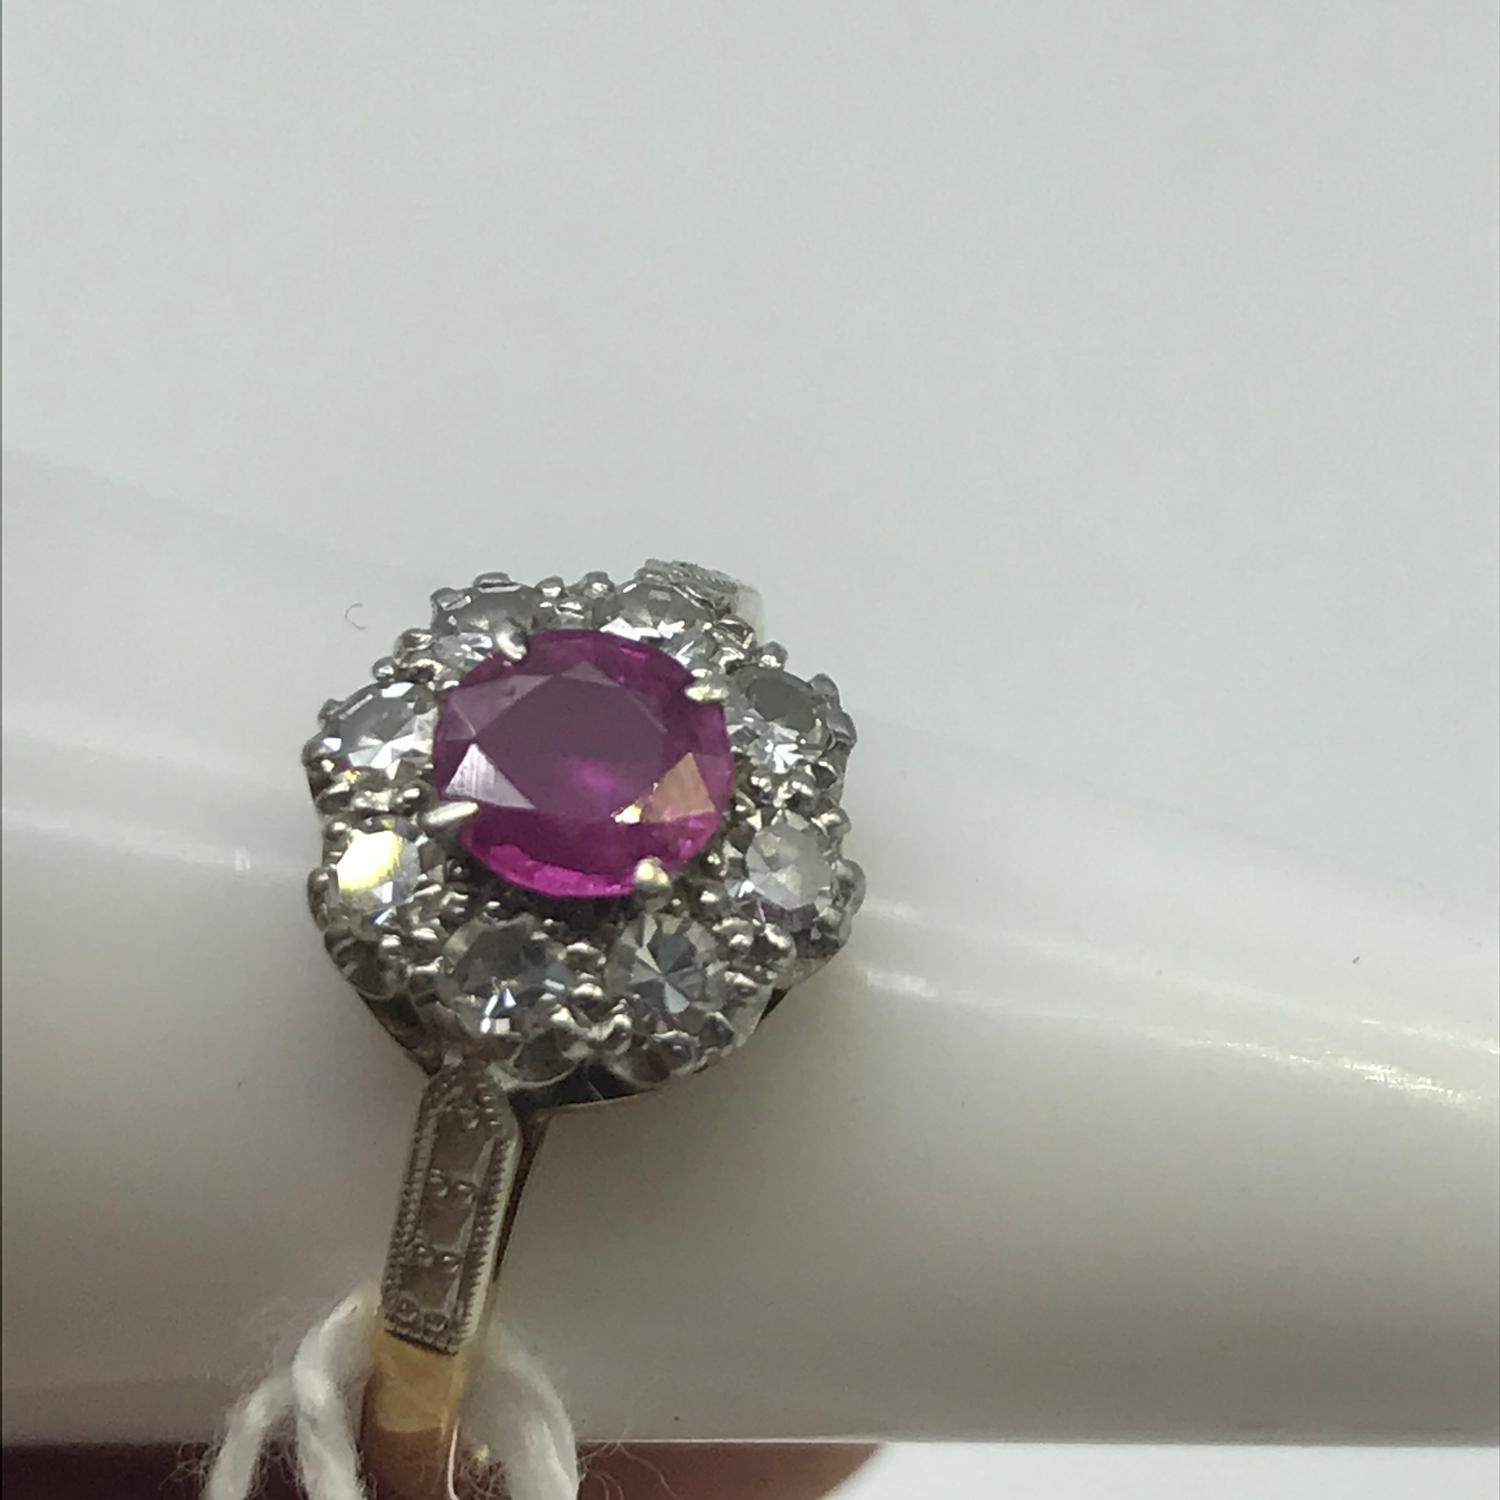 An 18ct gold and platinum ladies ring set with 8 diamonds and a large single ruby stone. Weighs 2. - Image 2 of 4